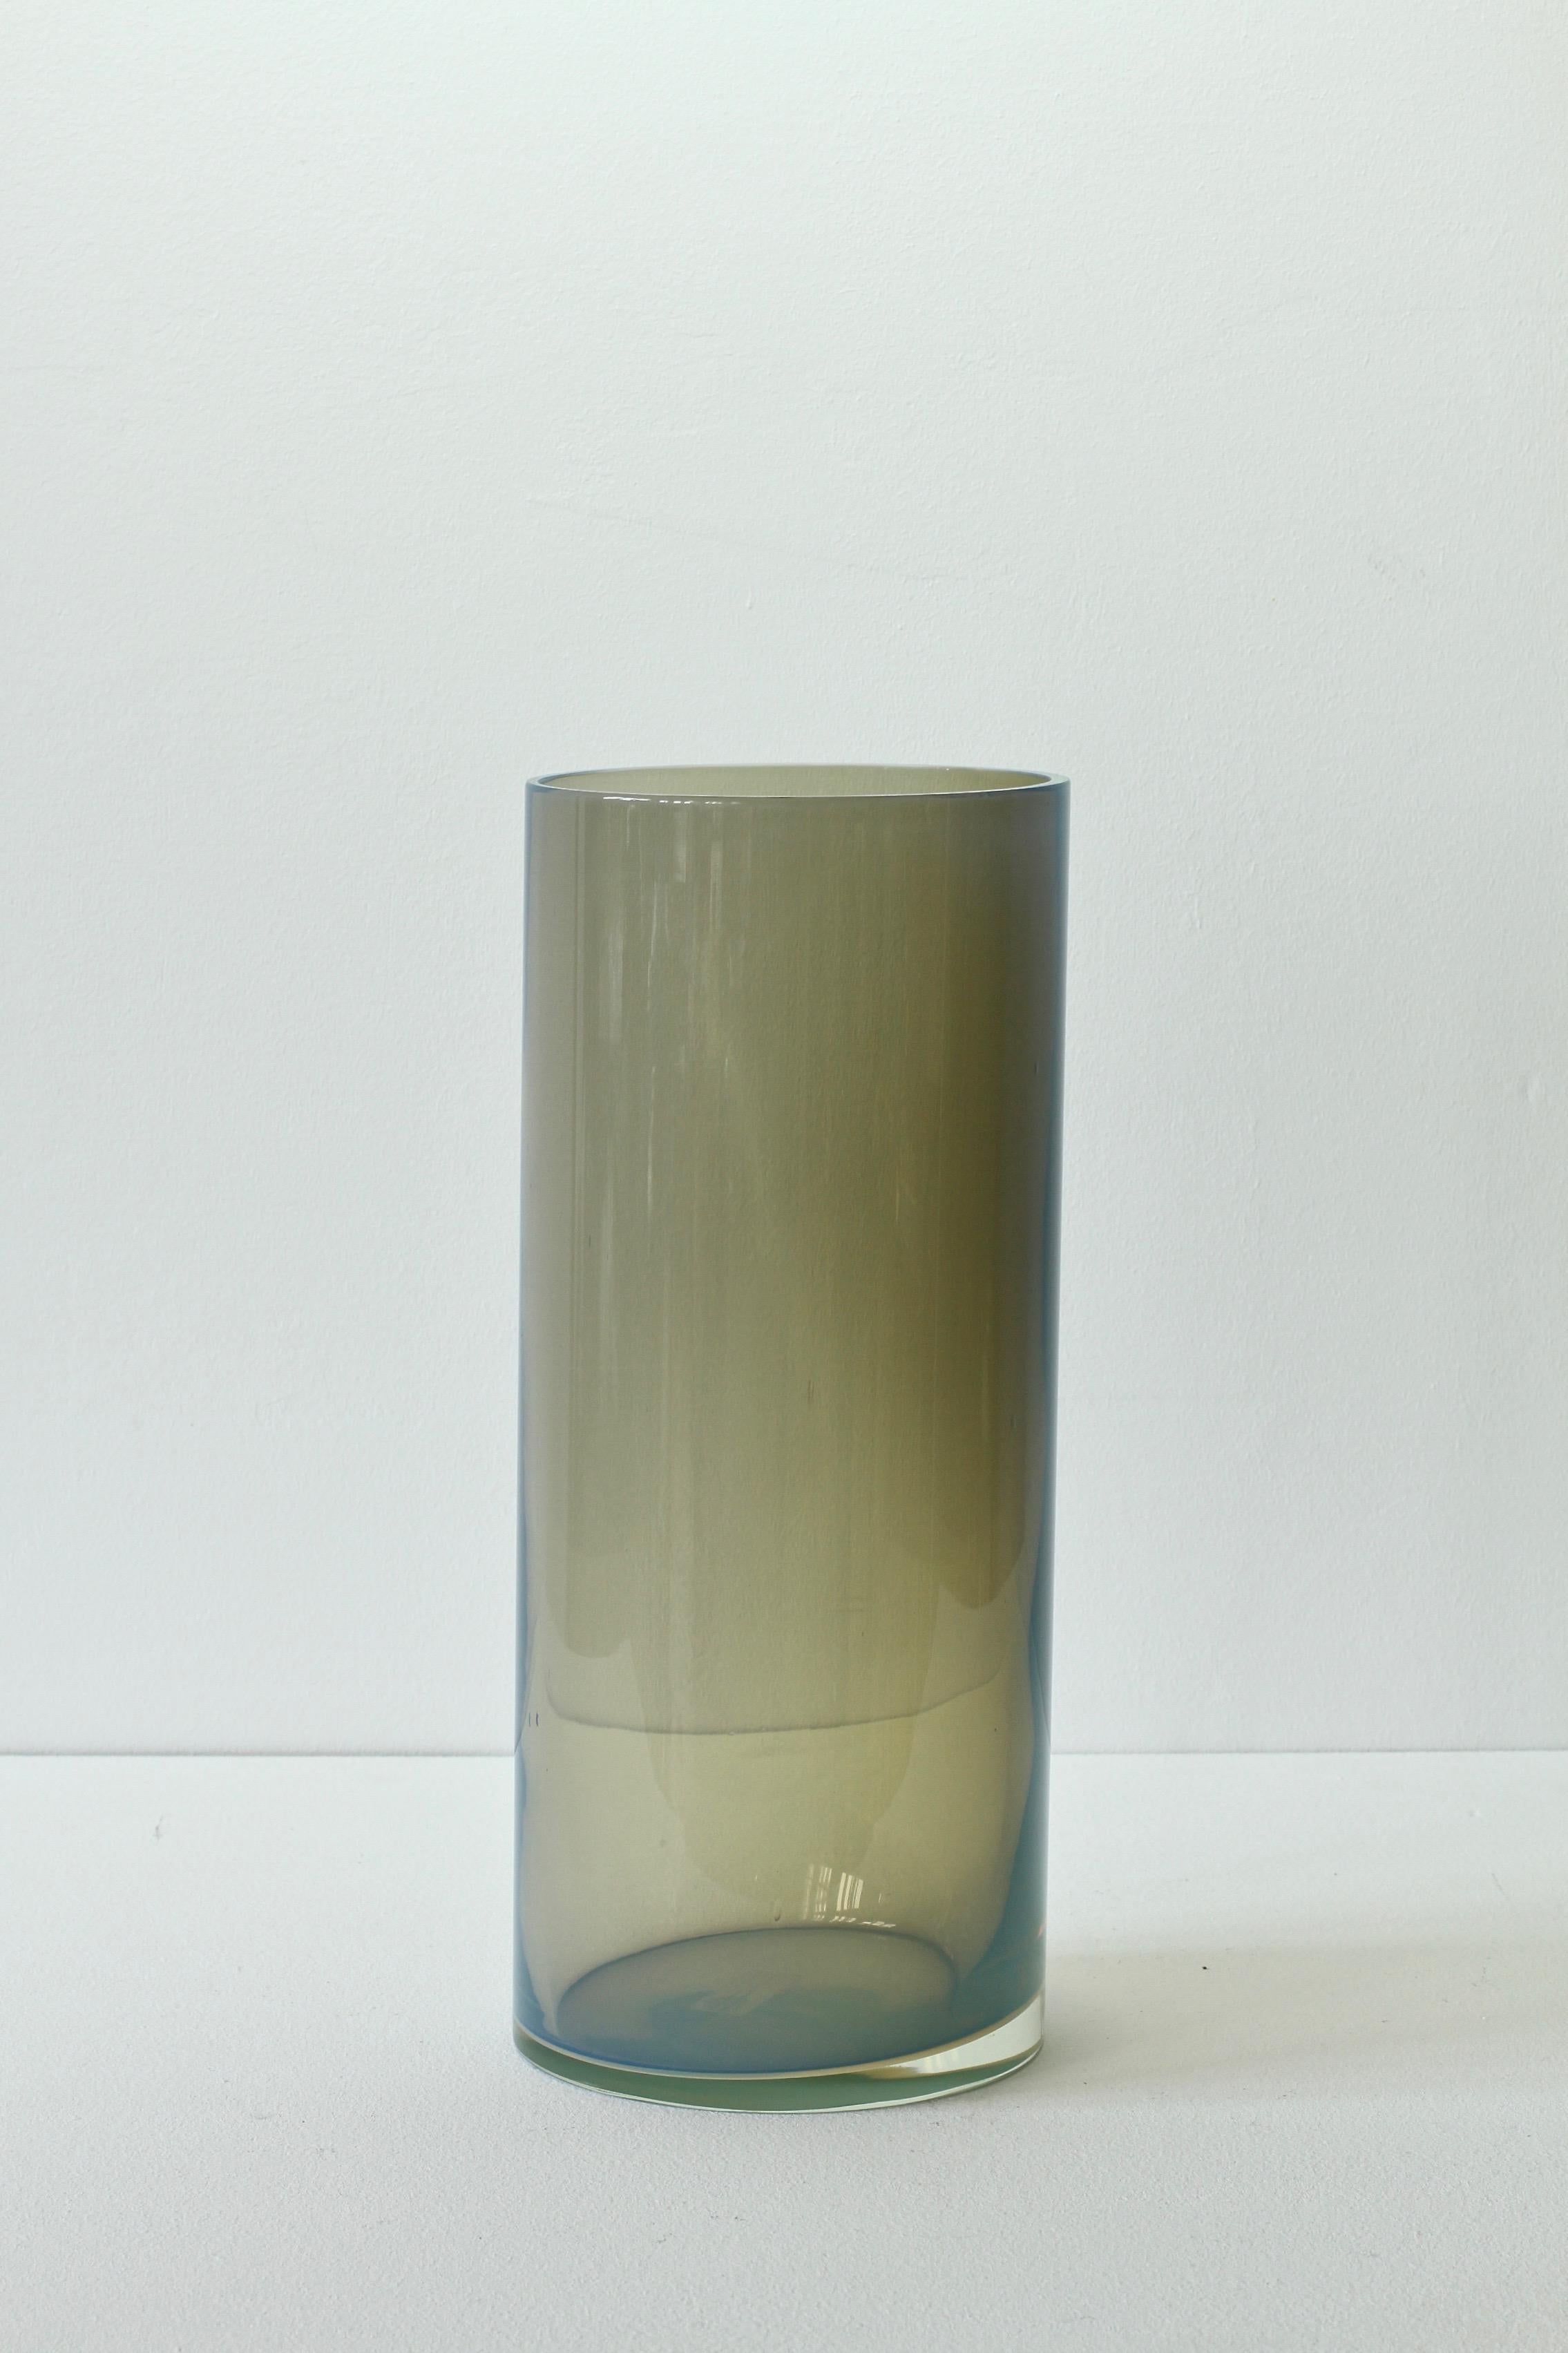 Tall midcentury, vintage Italian translucent smoked toned 'Opalino' Murano glass vase designed by Antonio da Ros for Cenedese, circa 1970-1990 Wonderful translucent color (color) of moss green smoked dark toned glass. Simplistic yet elegant form